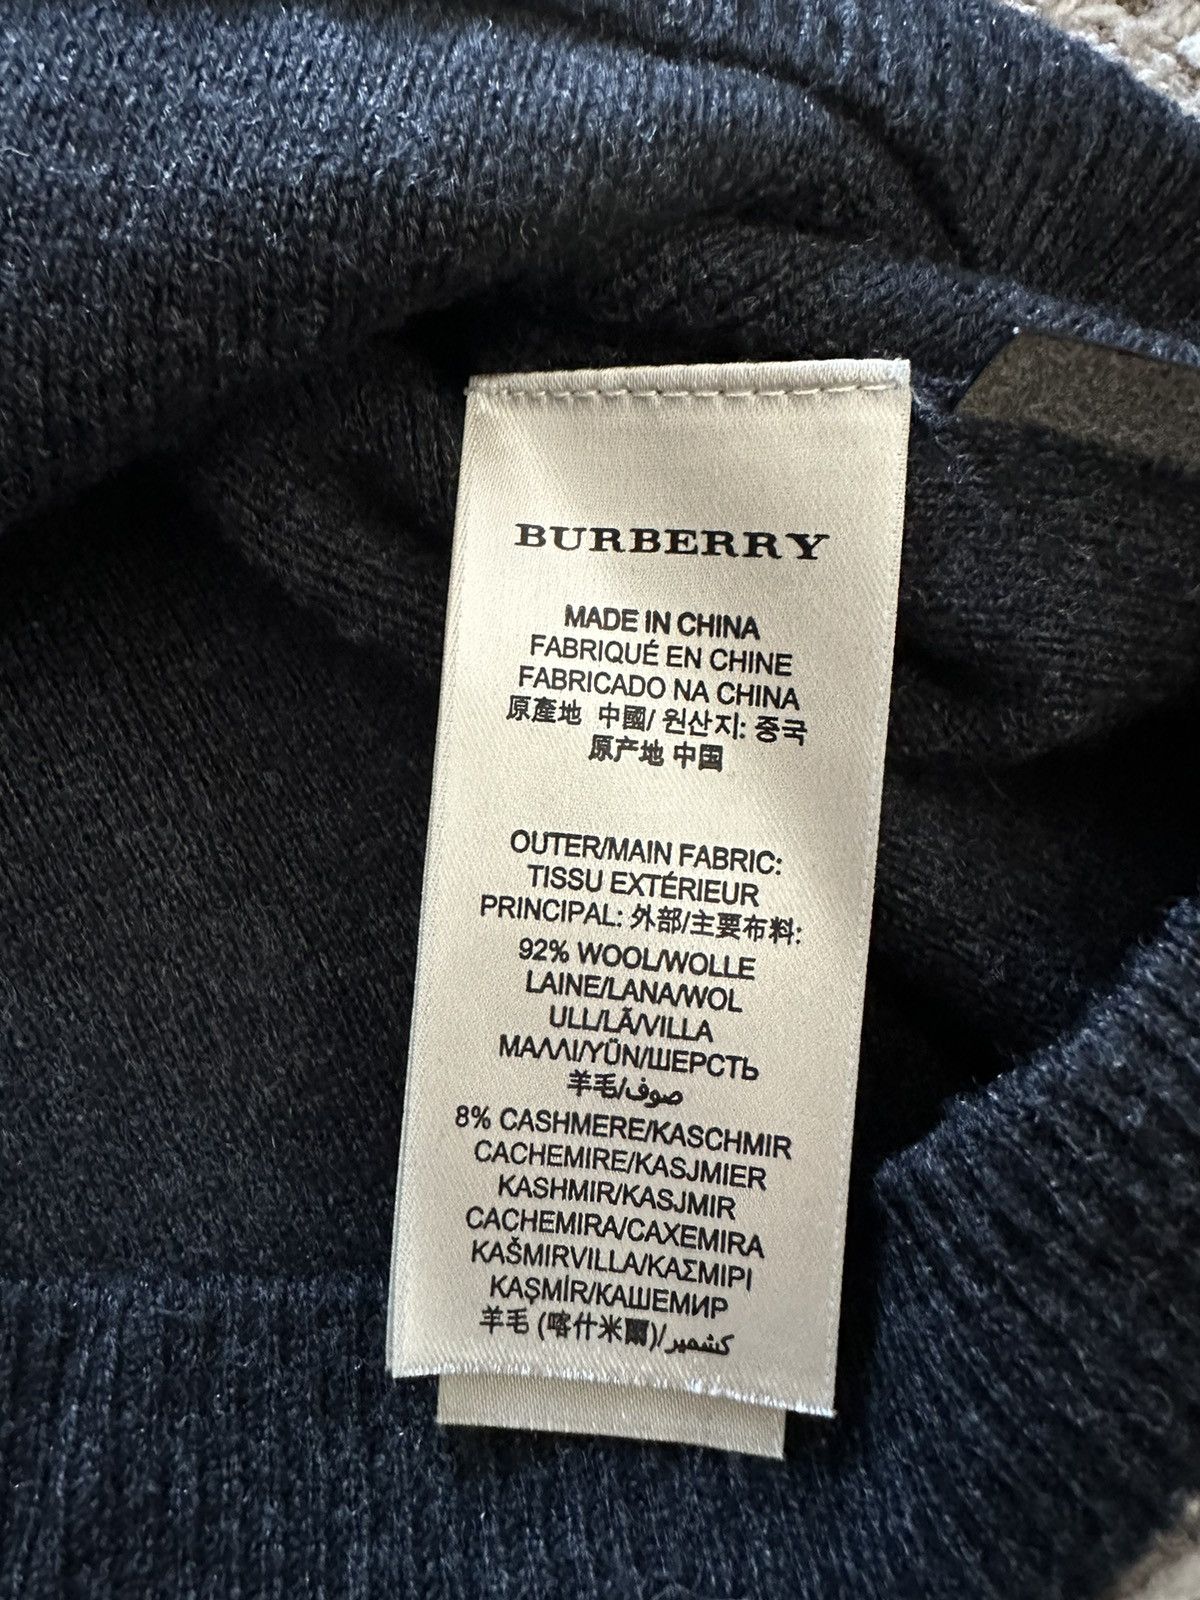 Burberry Burberry Brit Sweater Wool striped Small Size US S / EU 44-46 / 1 - 9 Thumbnail